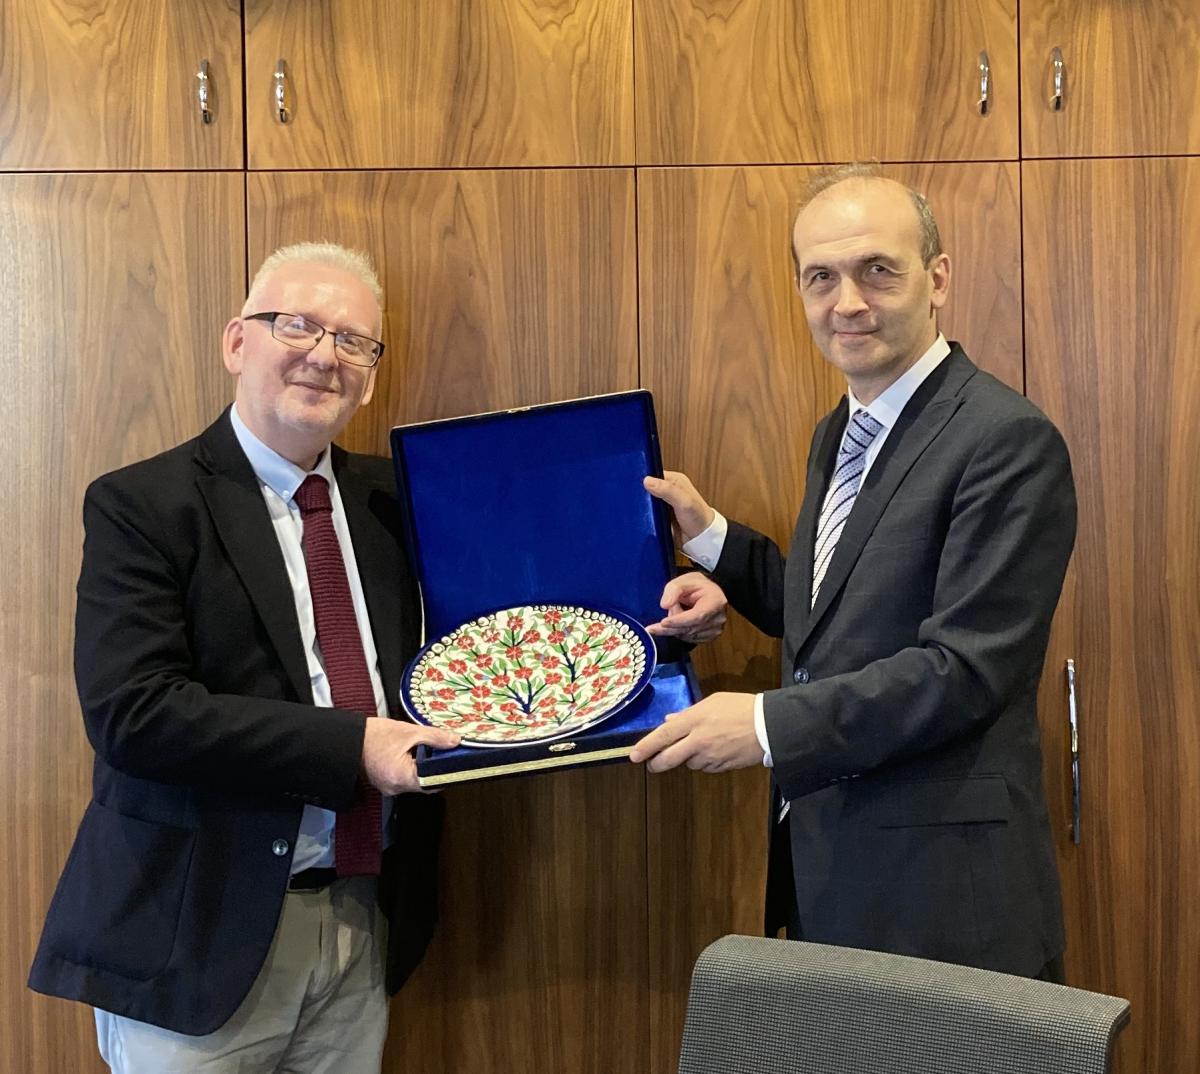 Mr. Tahir Hırslı – Director General for Strategy Development presents David Abbott with a gift to mark the visit of the delegation from the Turkish Ministry of Justice.